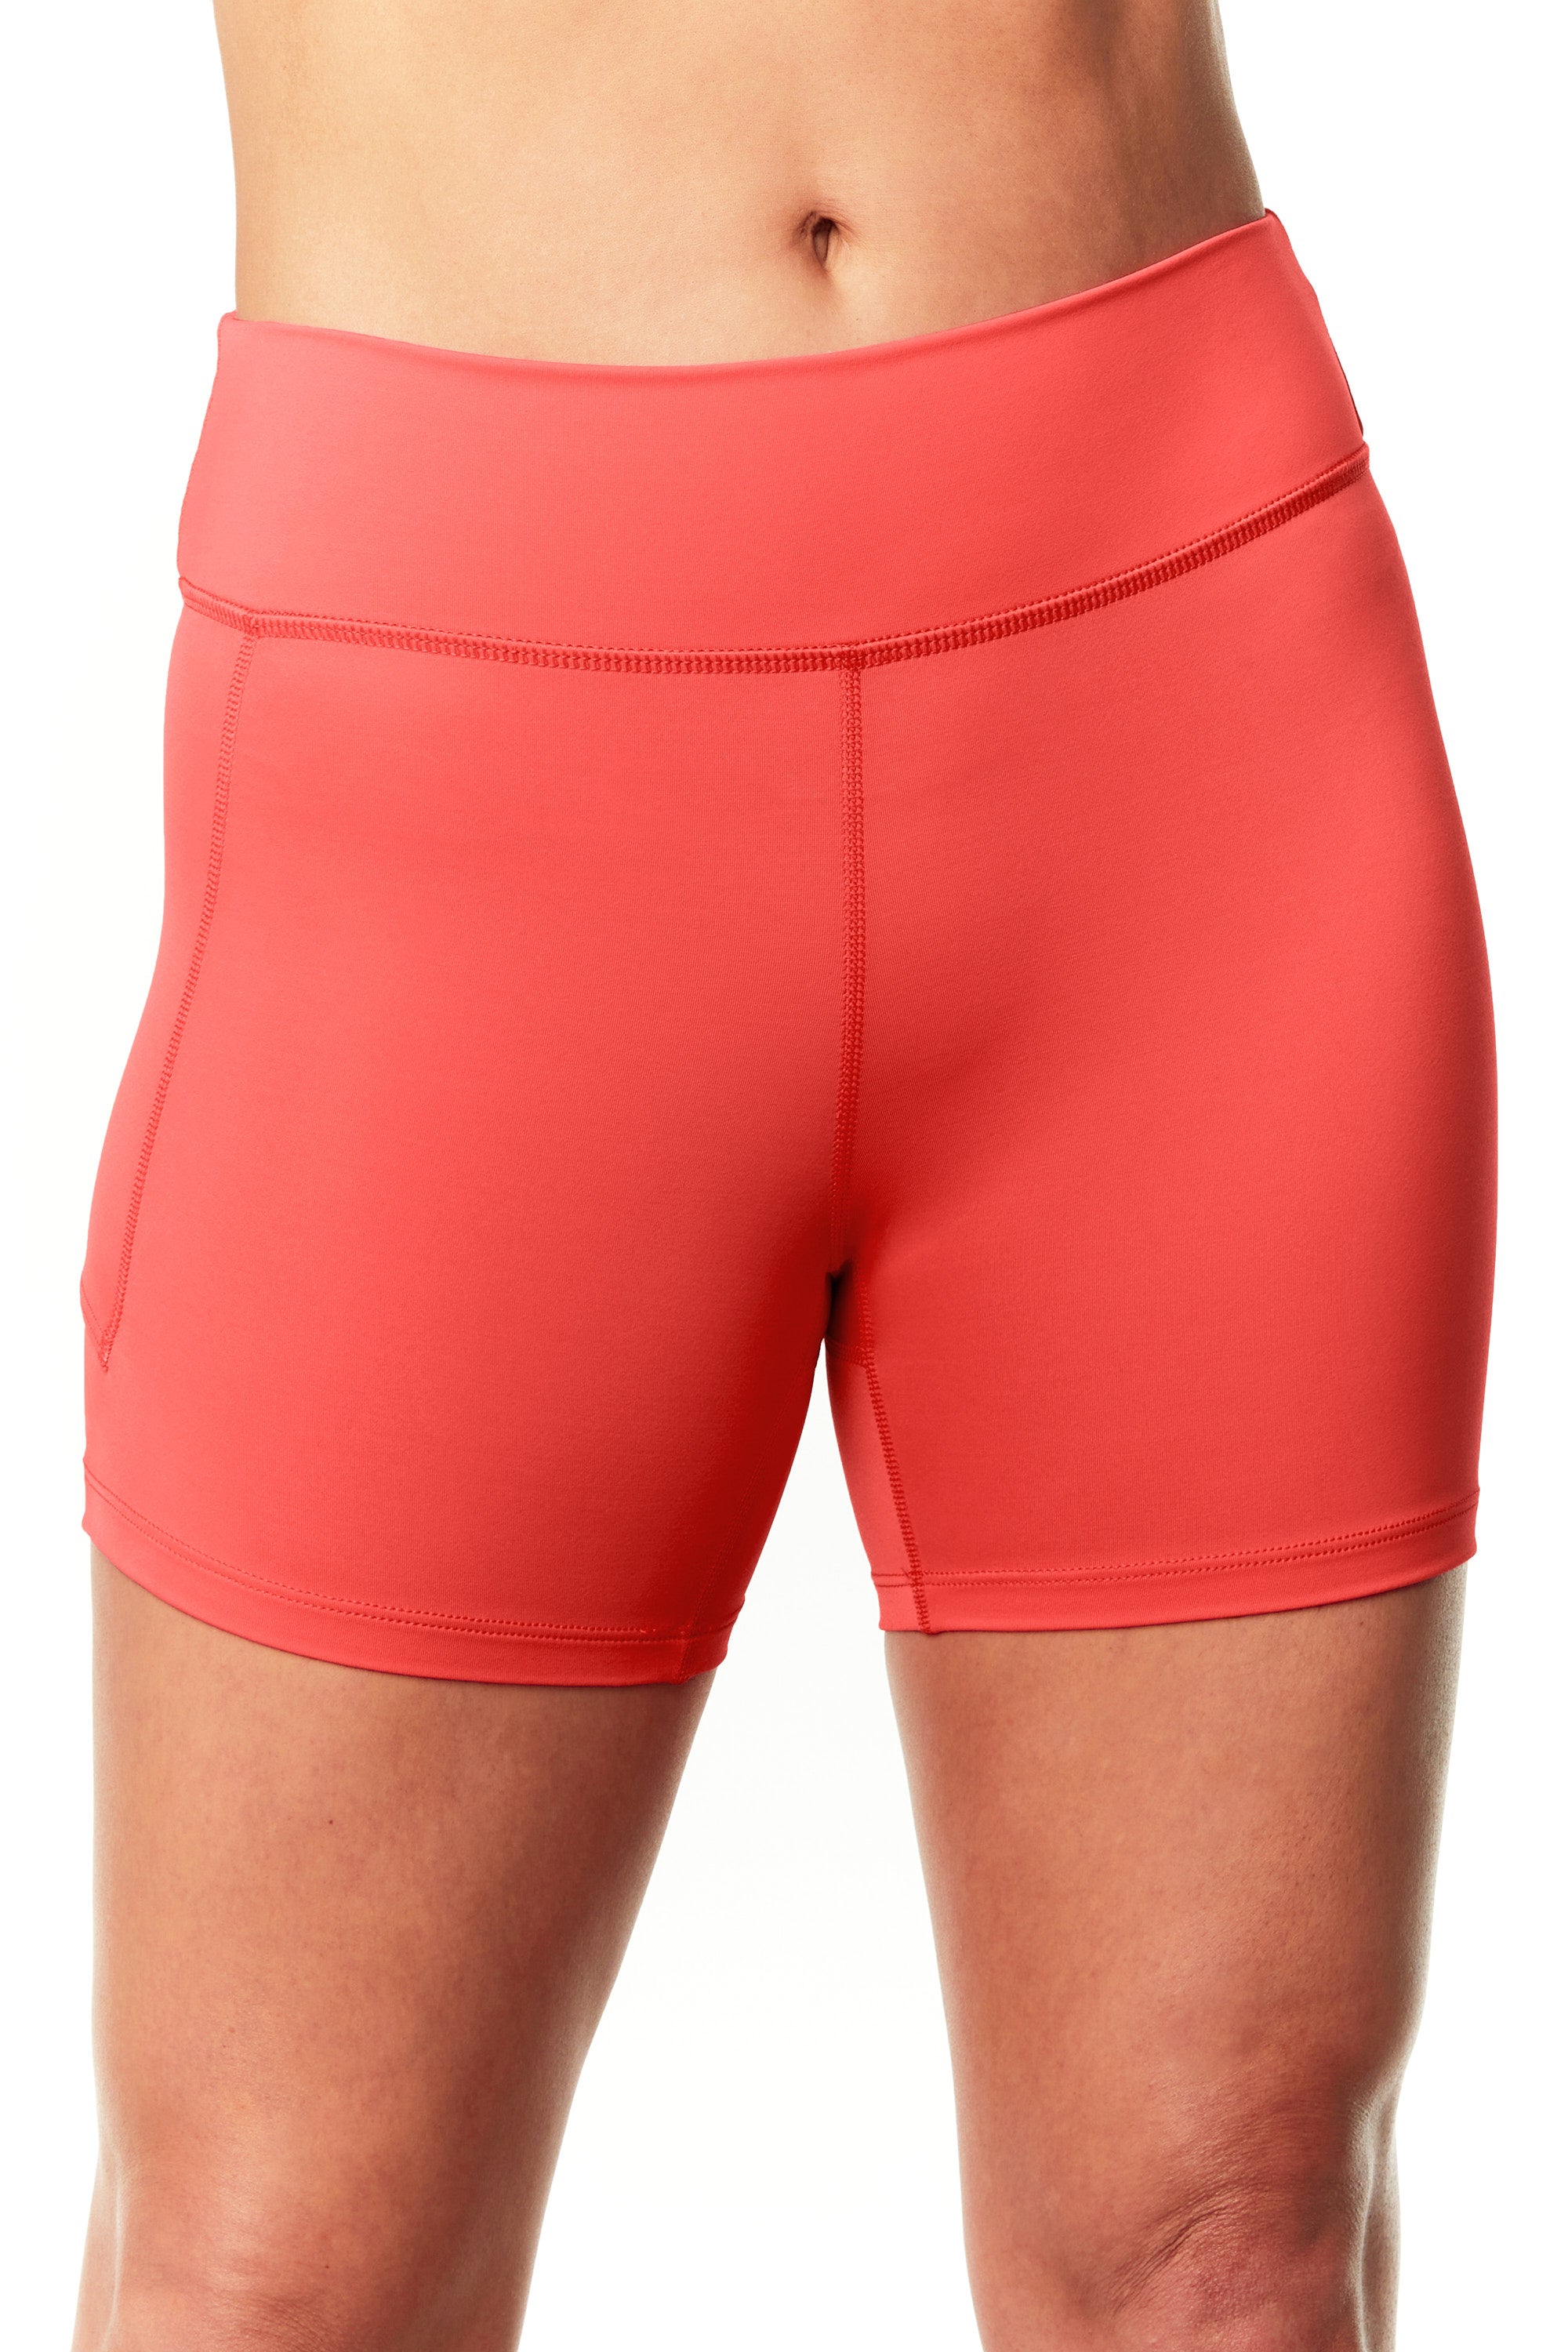 Bly Bloomer Shorts In Coral